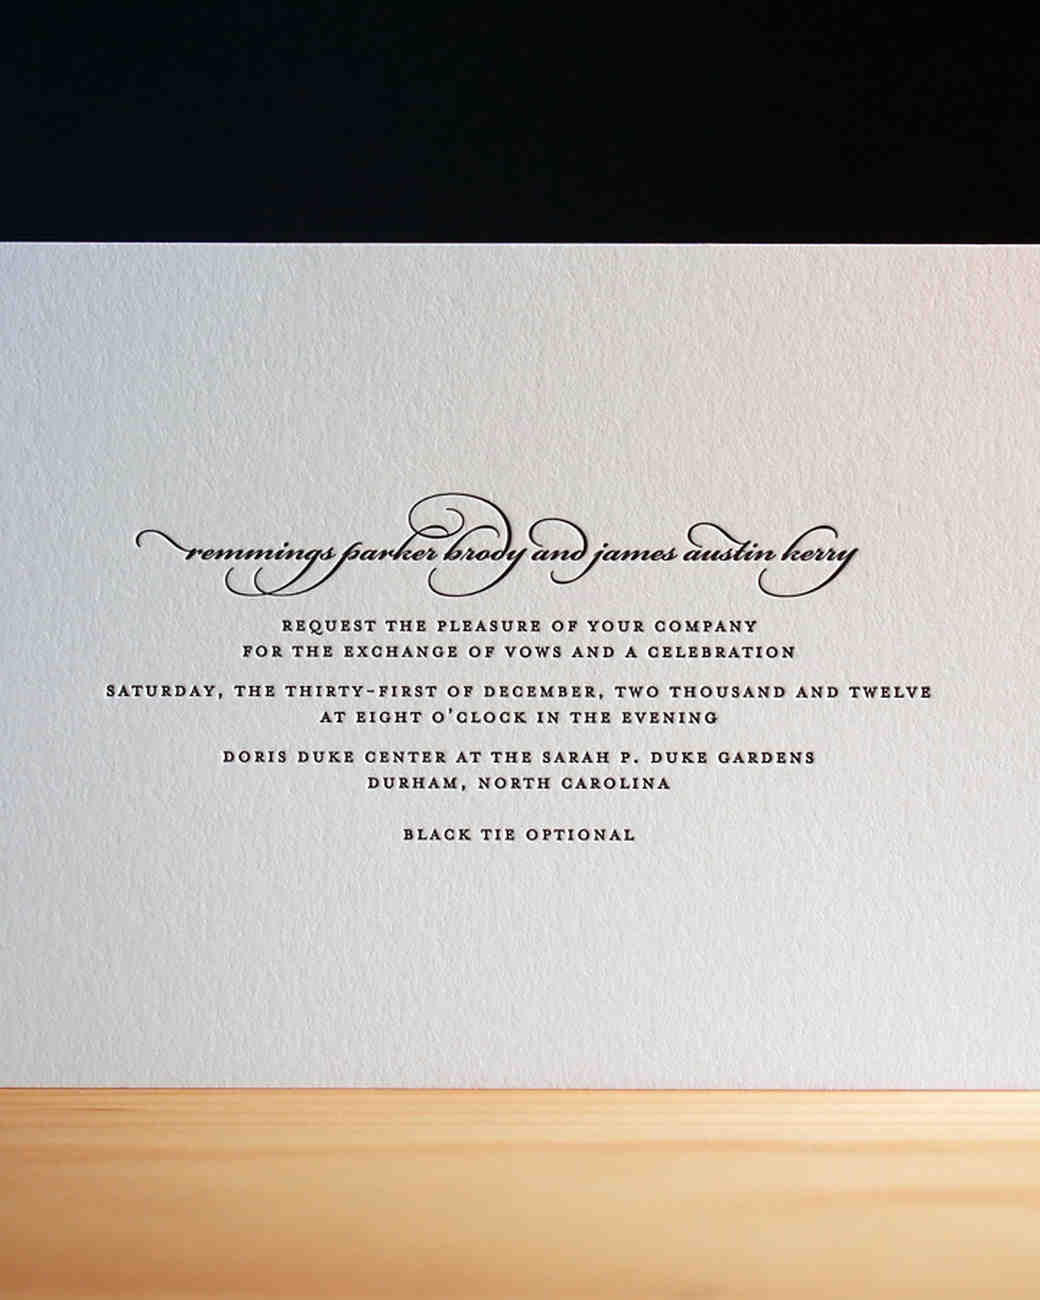 Classic Wedding Invitations for Traditional Brides and Grooms | Martha ...